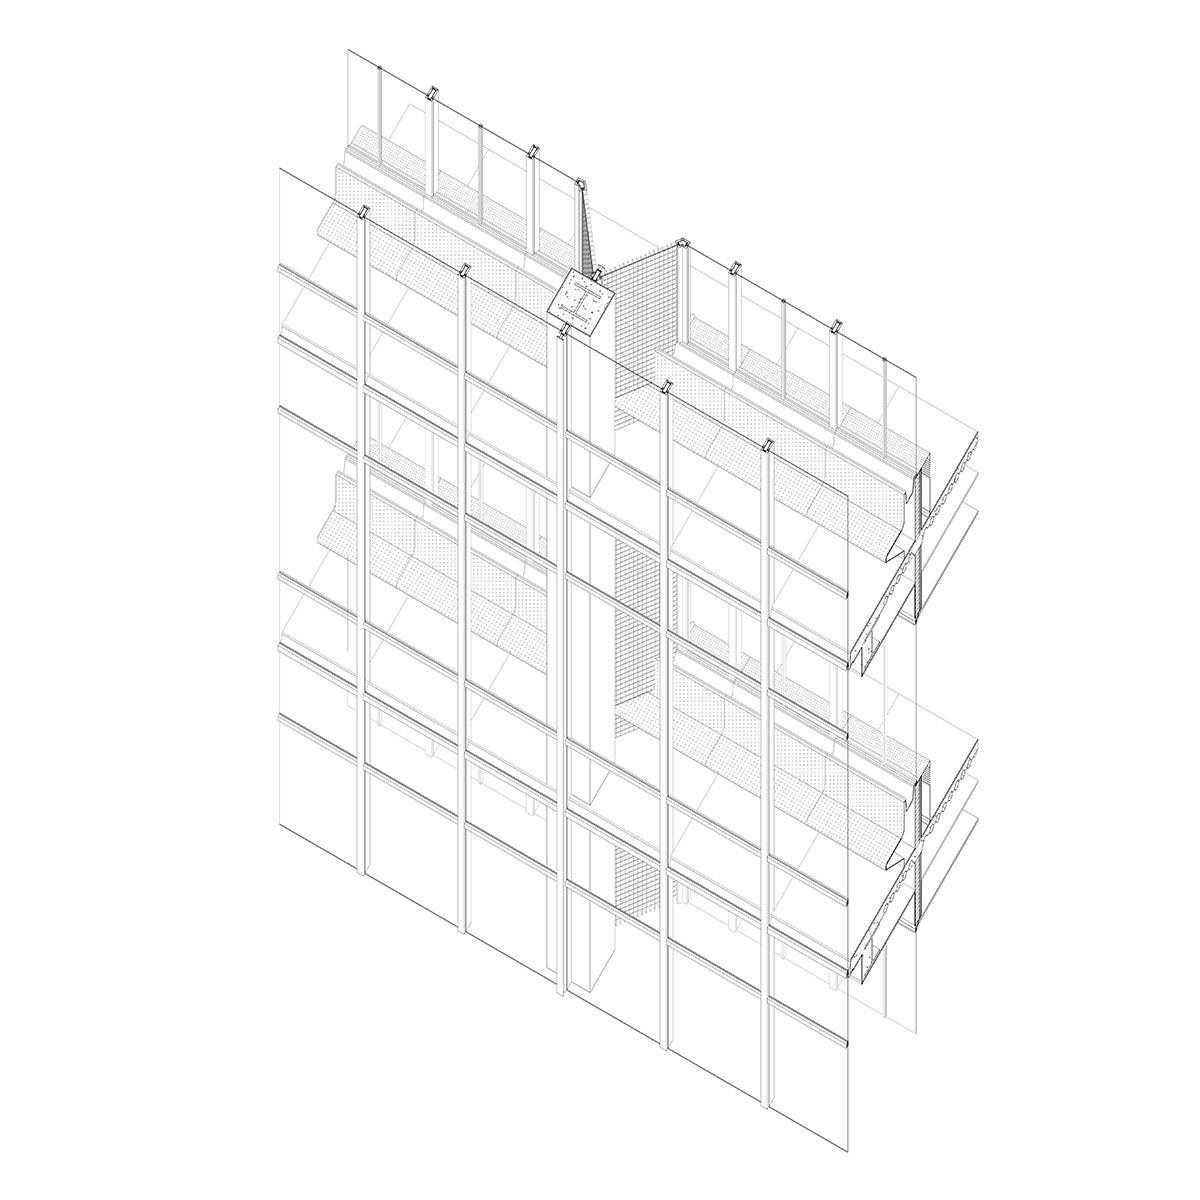 Black and white axonometric drawing of glass facade defined by thin i-beams, drawing illustrates a portion of three building floors.